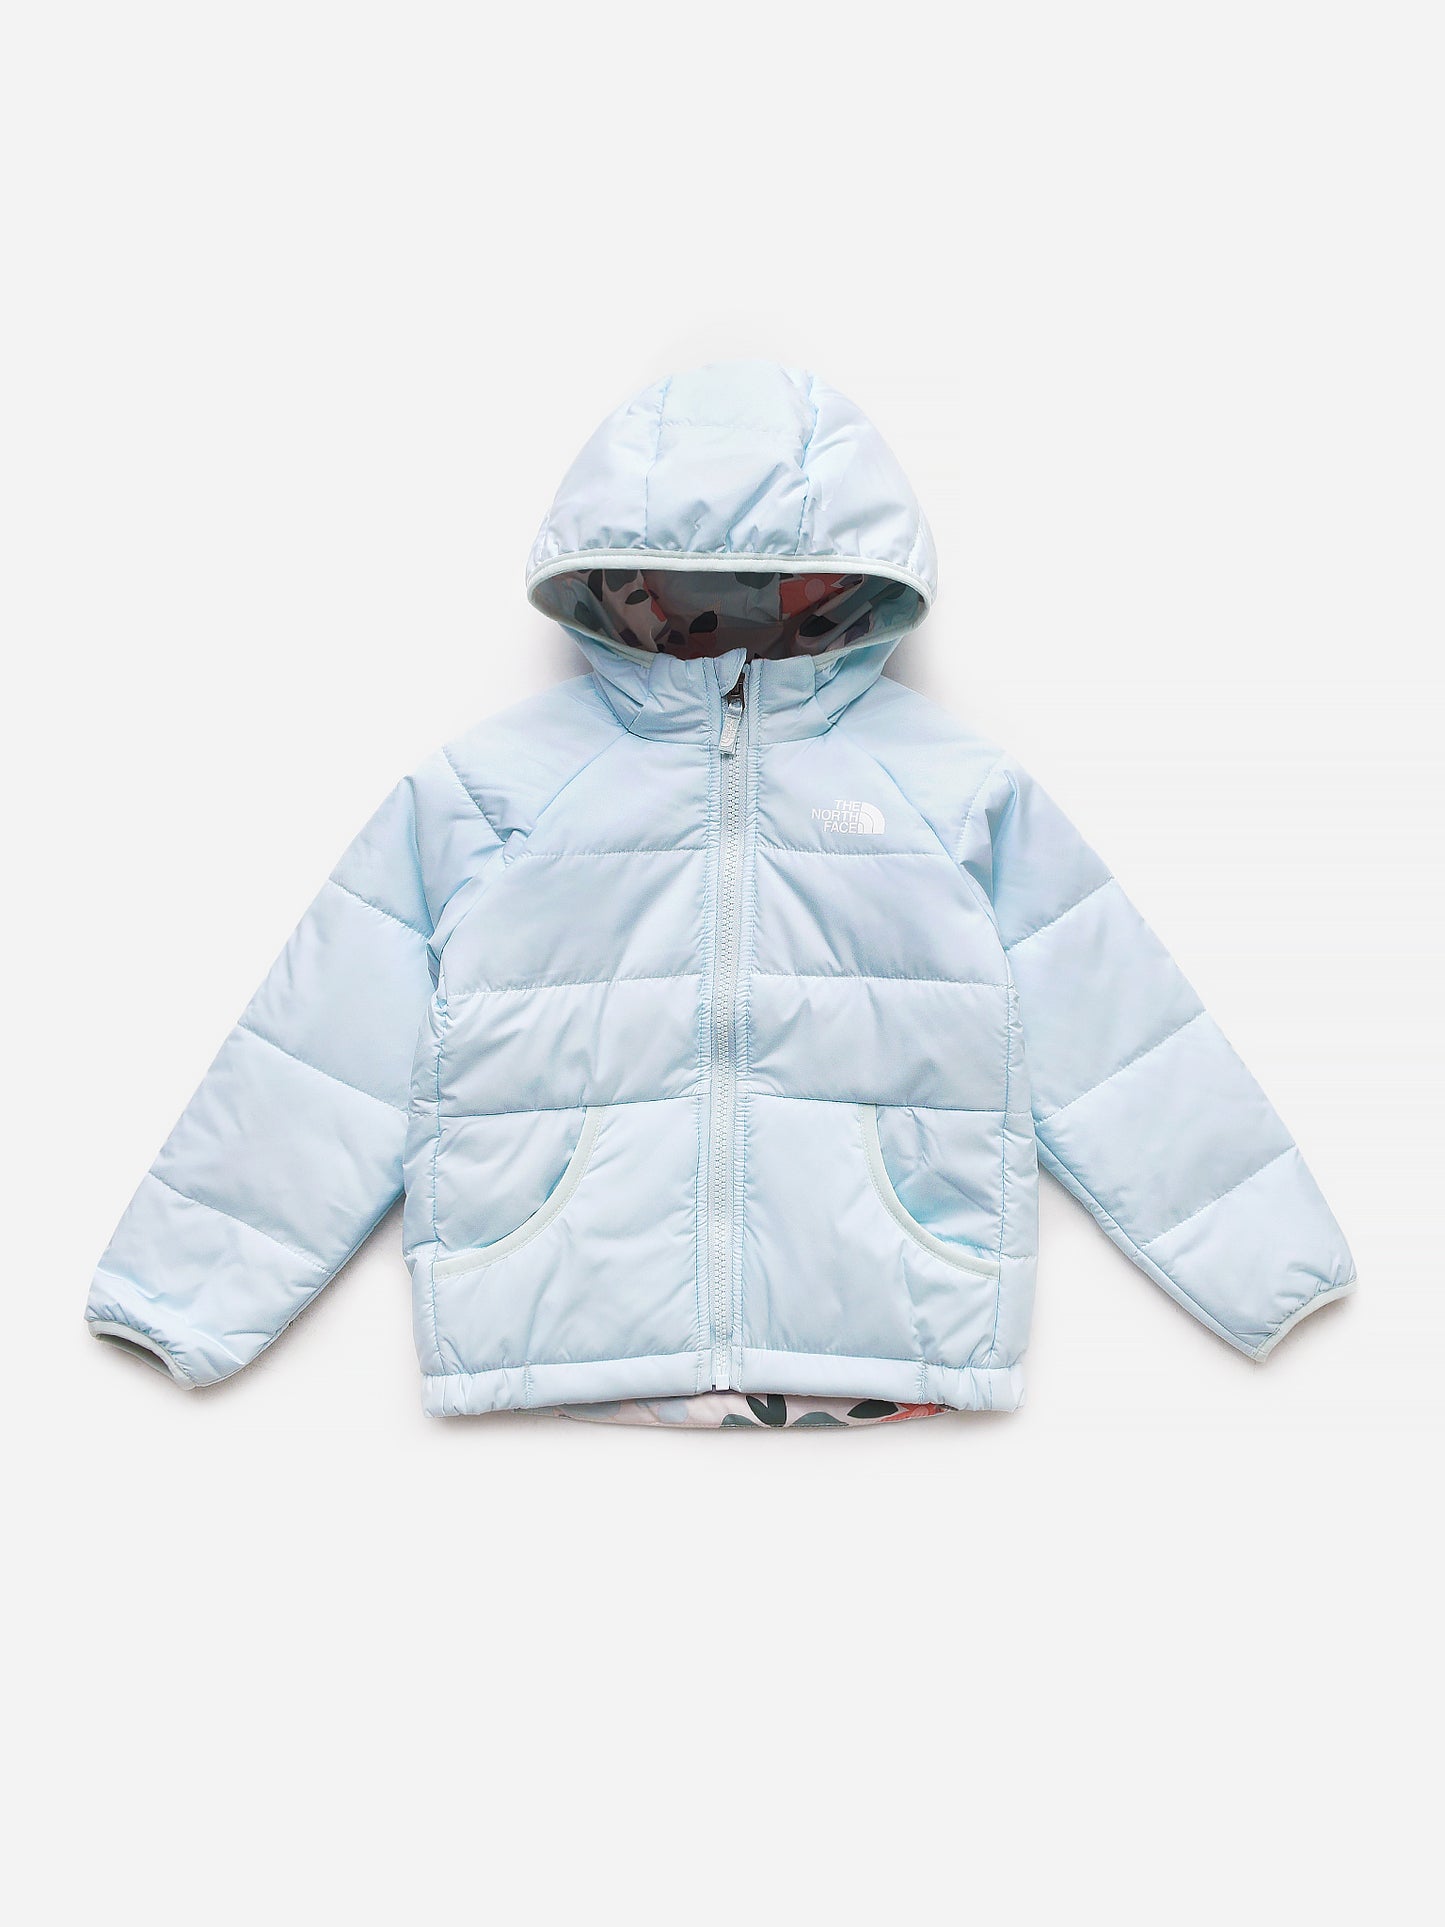 The North Face Little Kids' Reversible Perrito Jacket